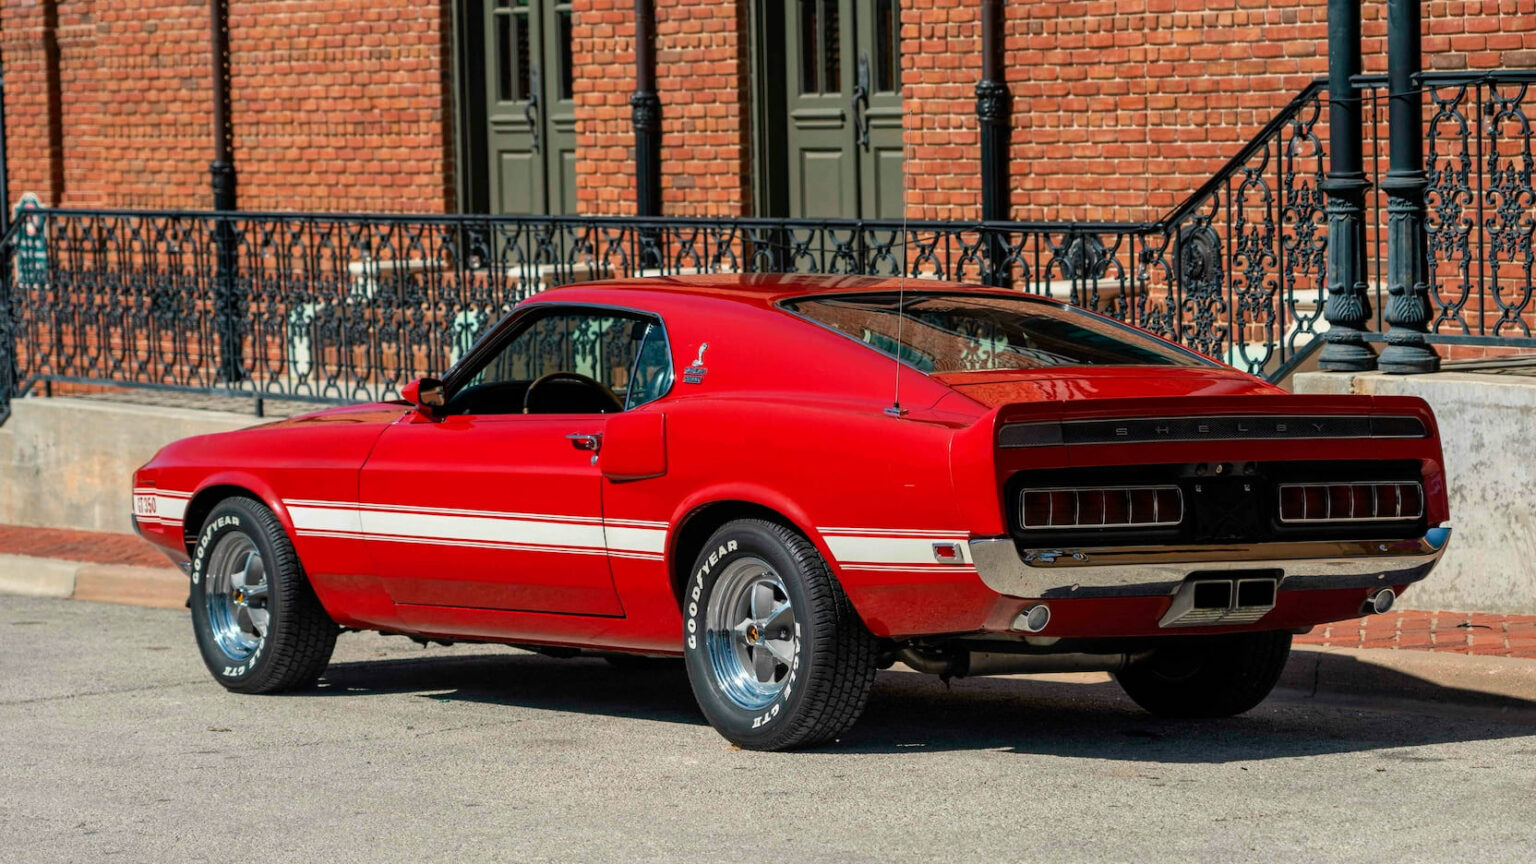 Bob Seger's Old 1969 Shelby GT350 Fastback Is For Sale